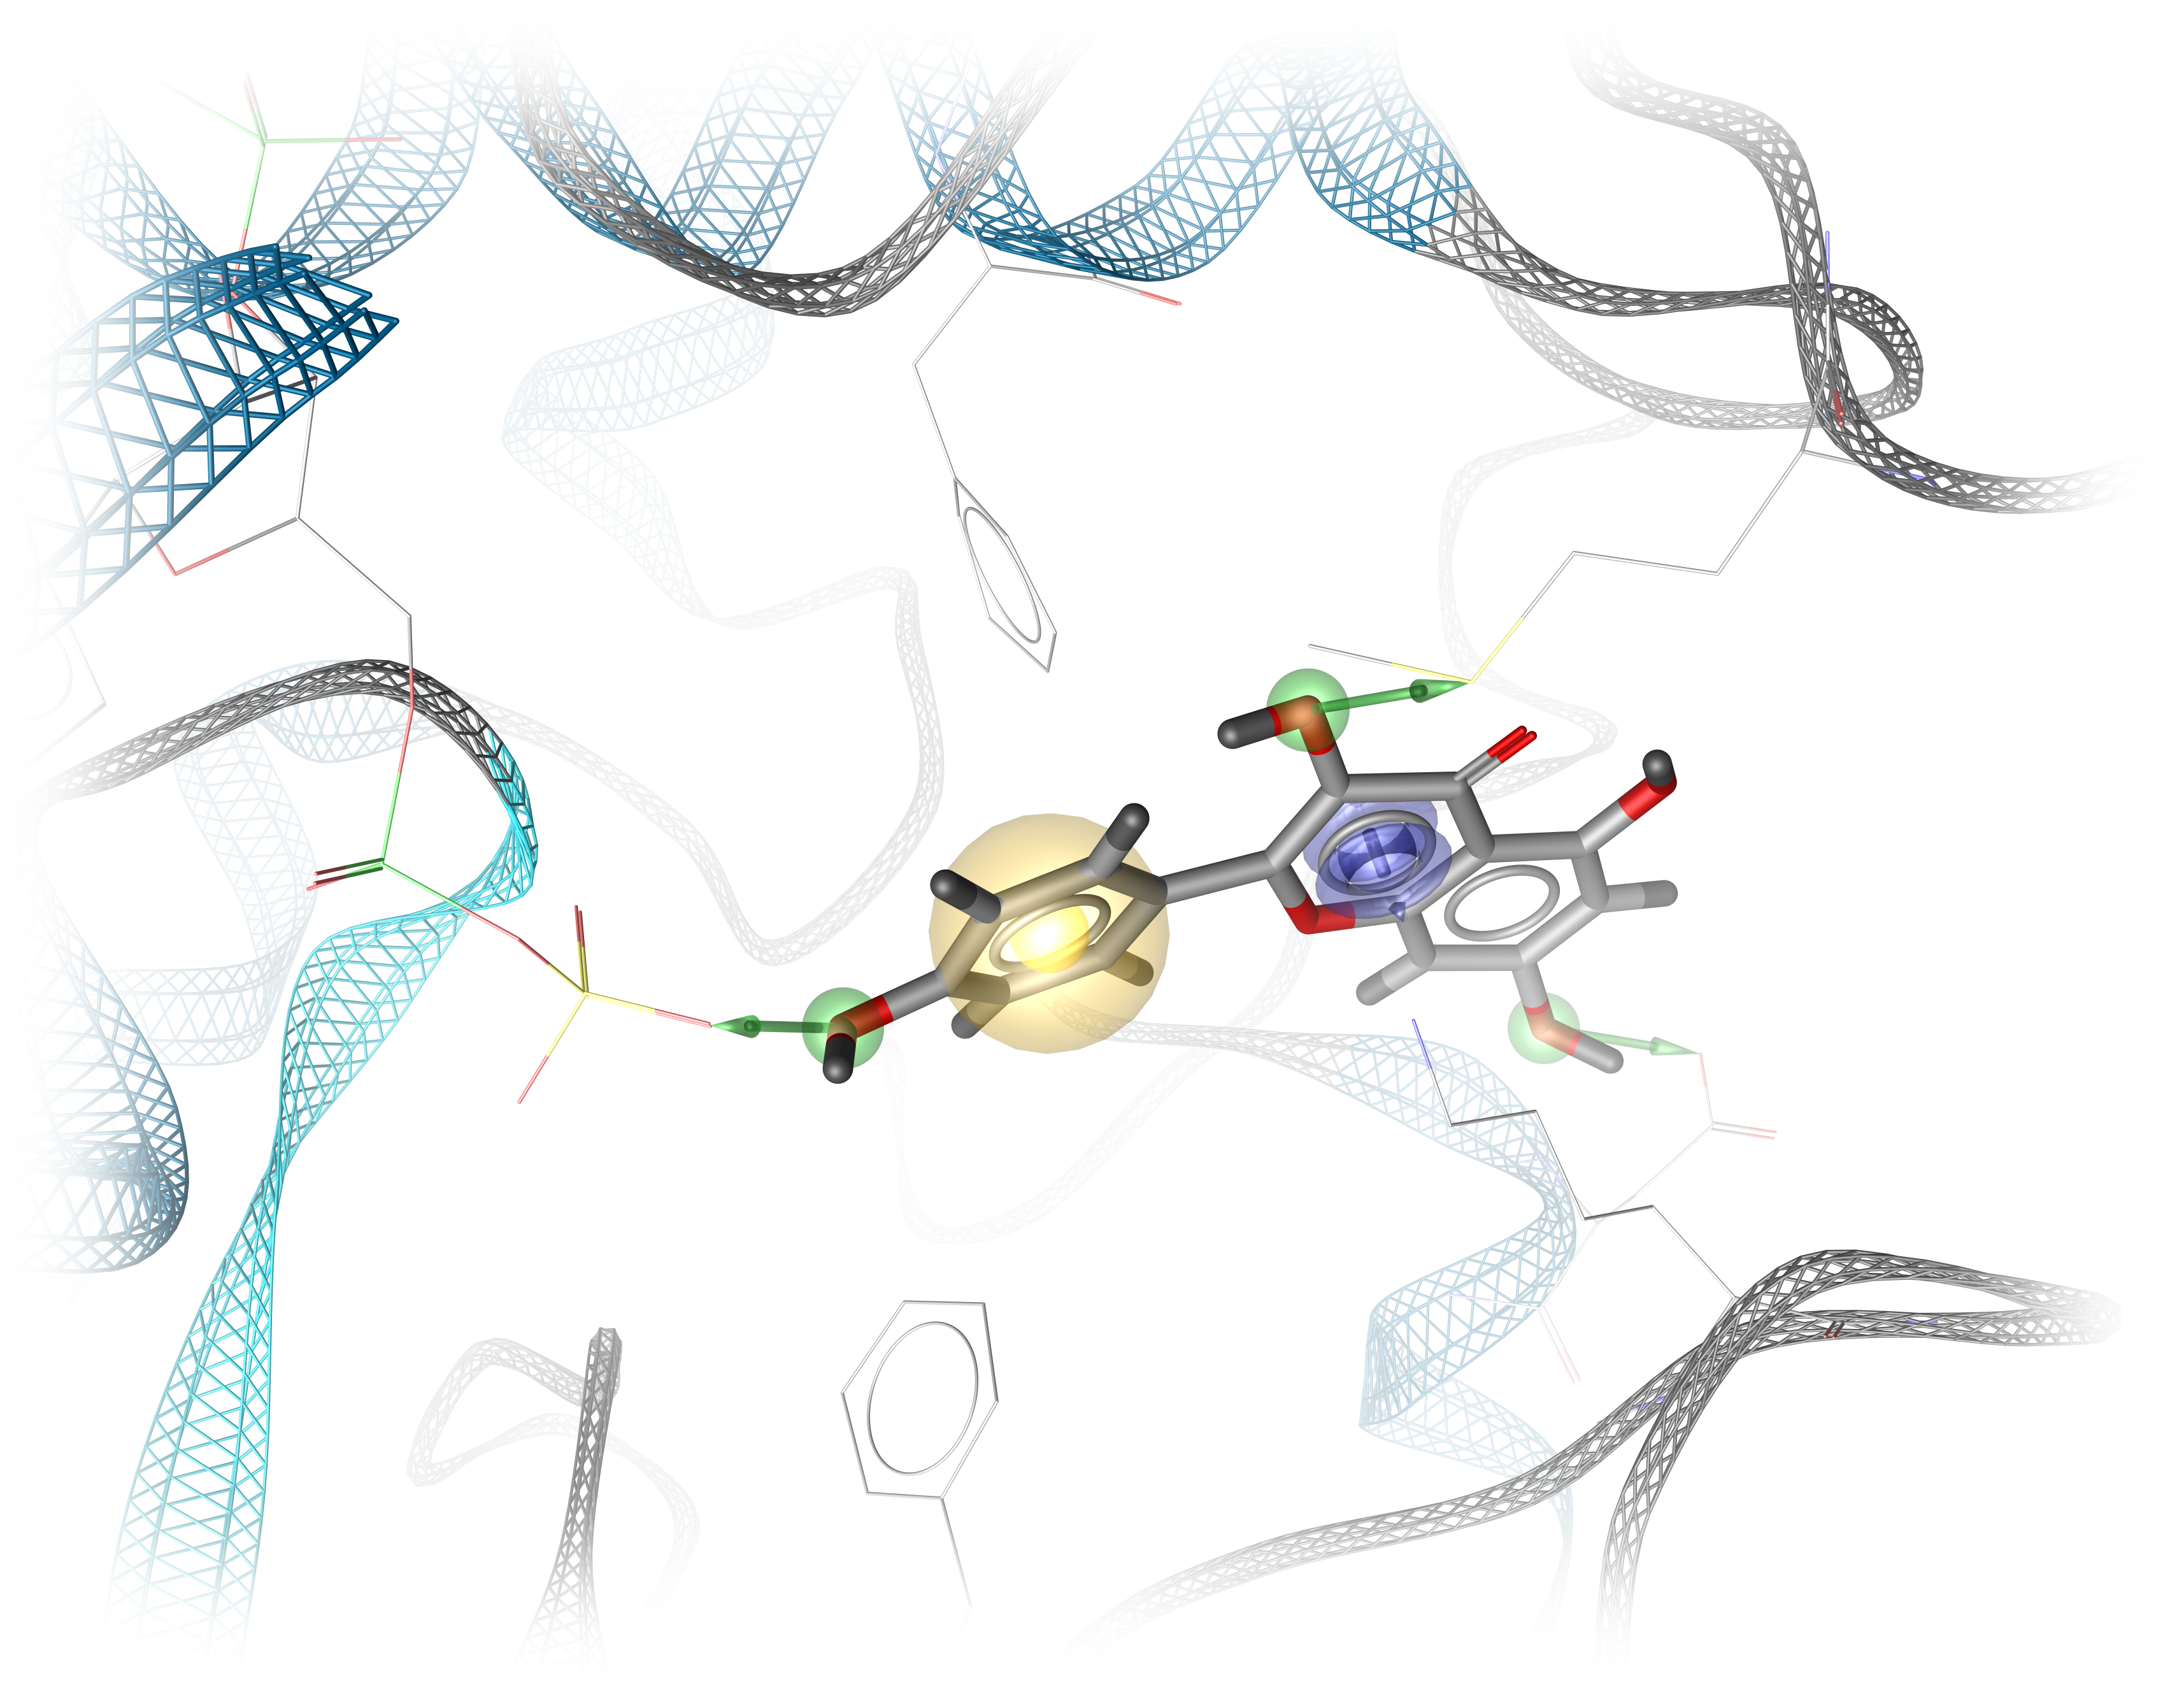 Structure-based pharmacophore representing protein-ligand interactions (figure by Dominique Sydow)